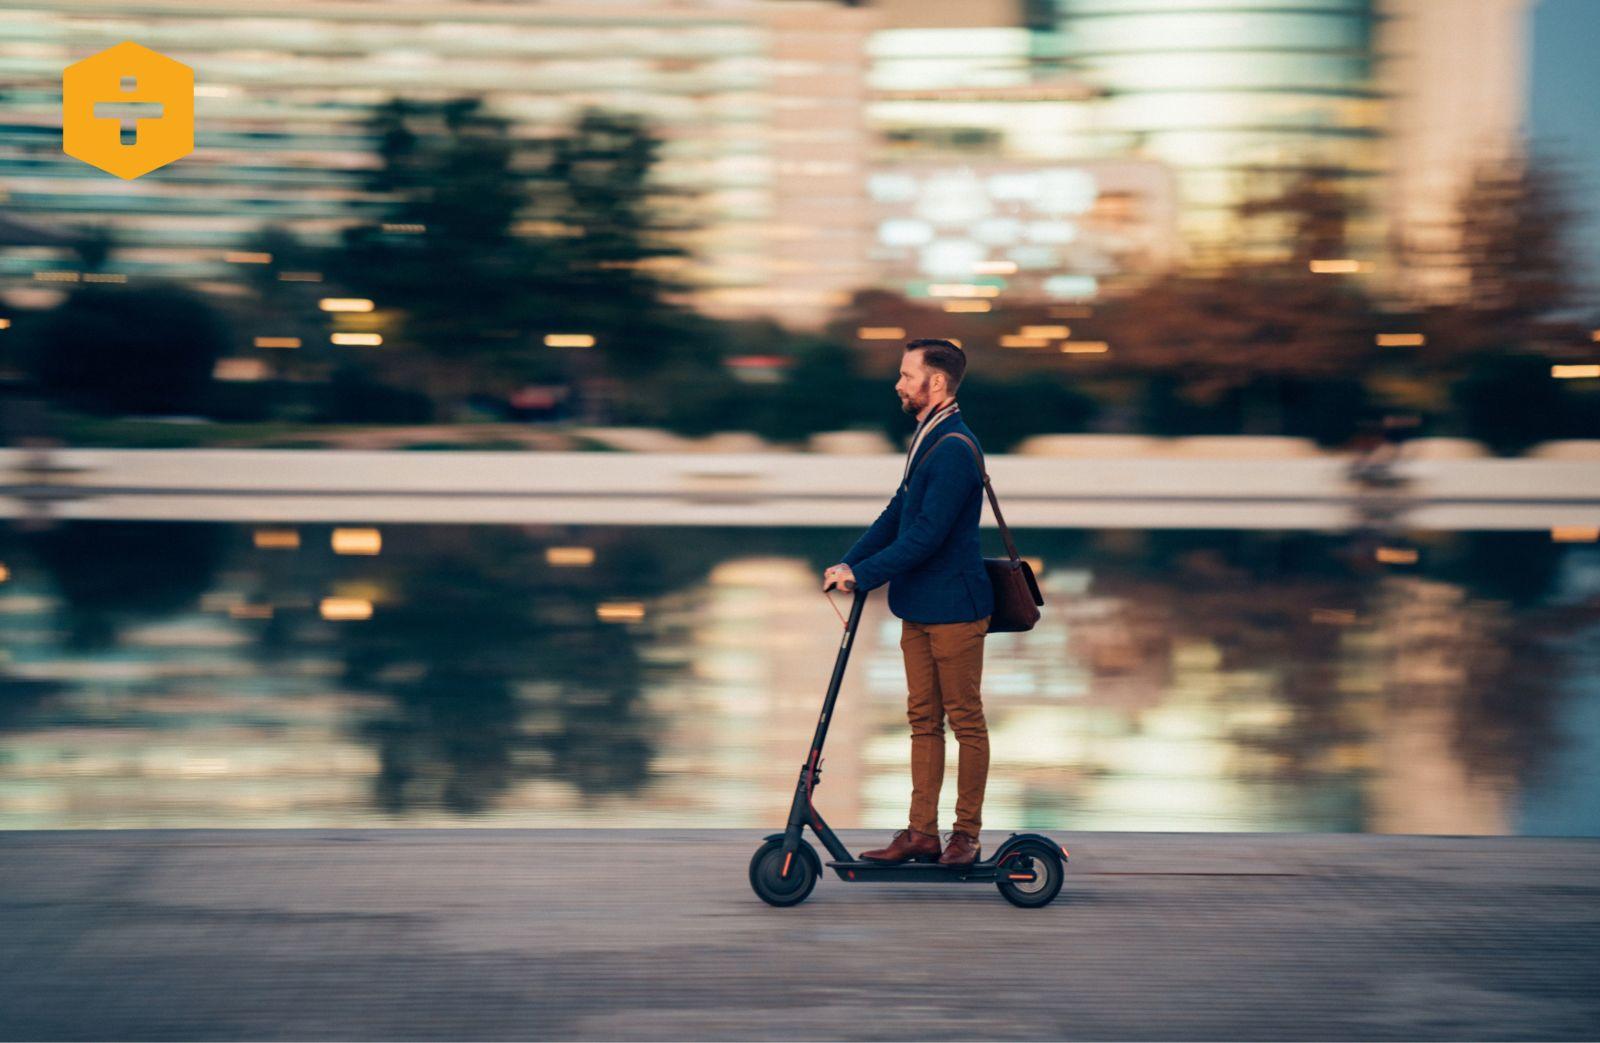 Electric scooters are not going anywhere and they could be the perfect opportunity to change the design of cities and office buildings alike.